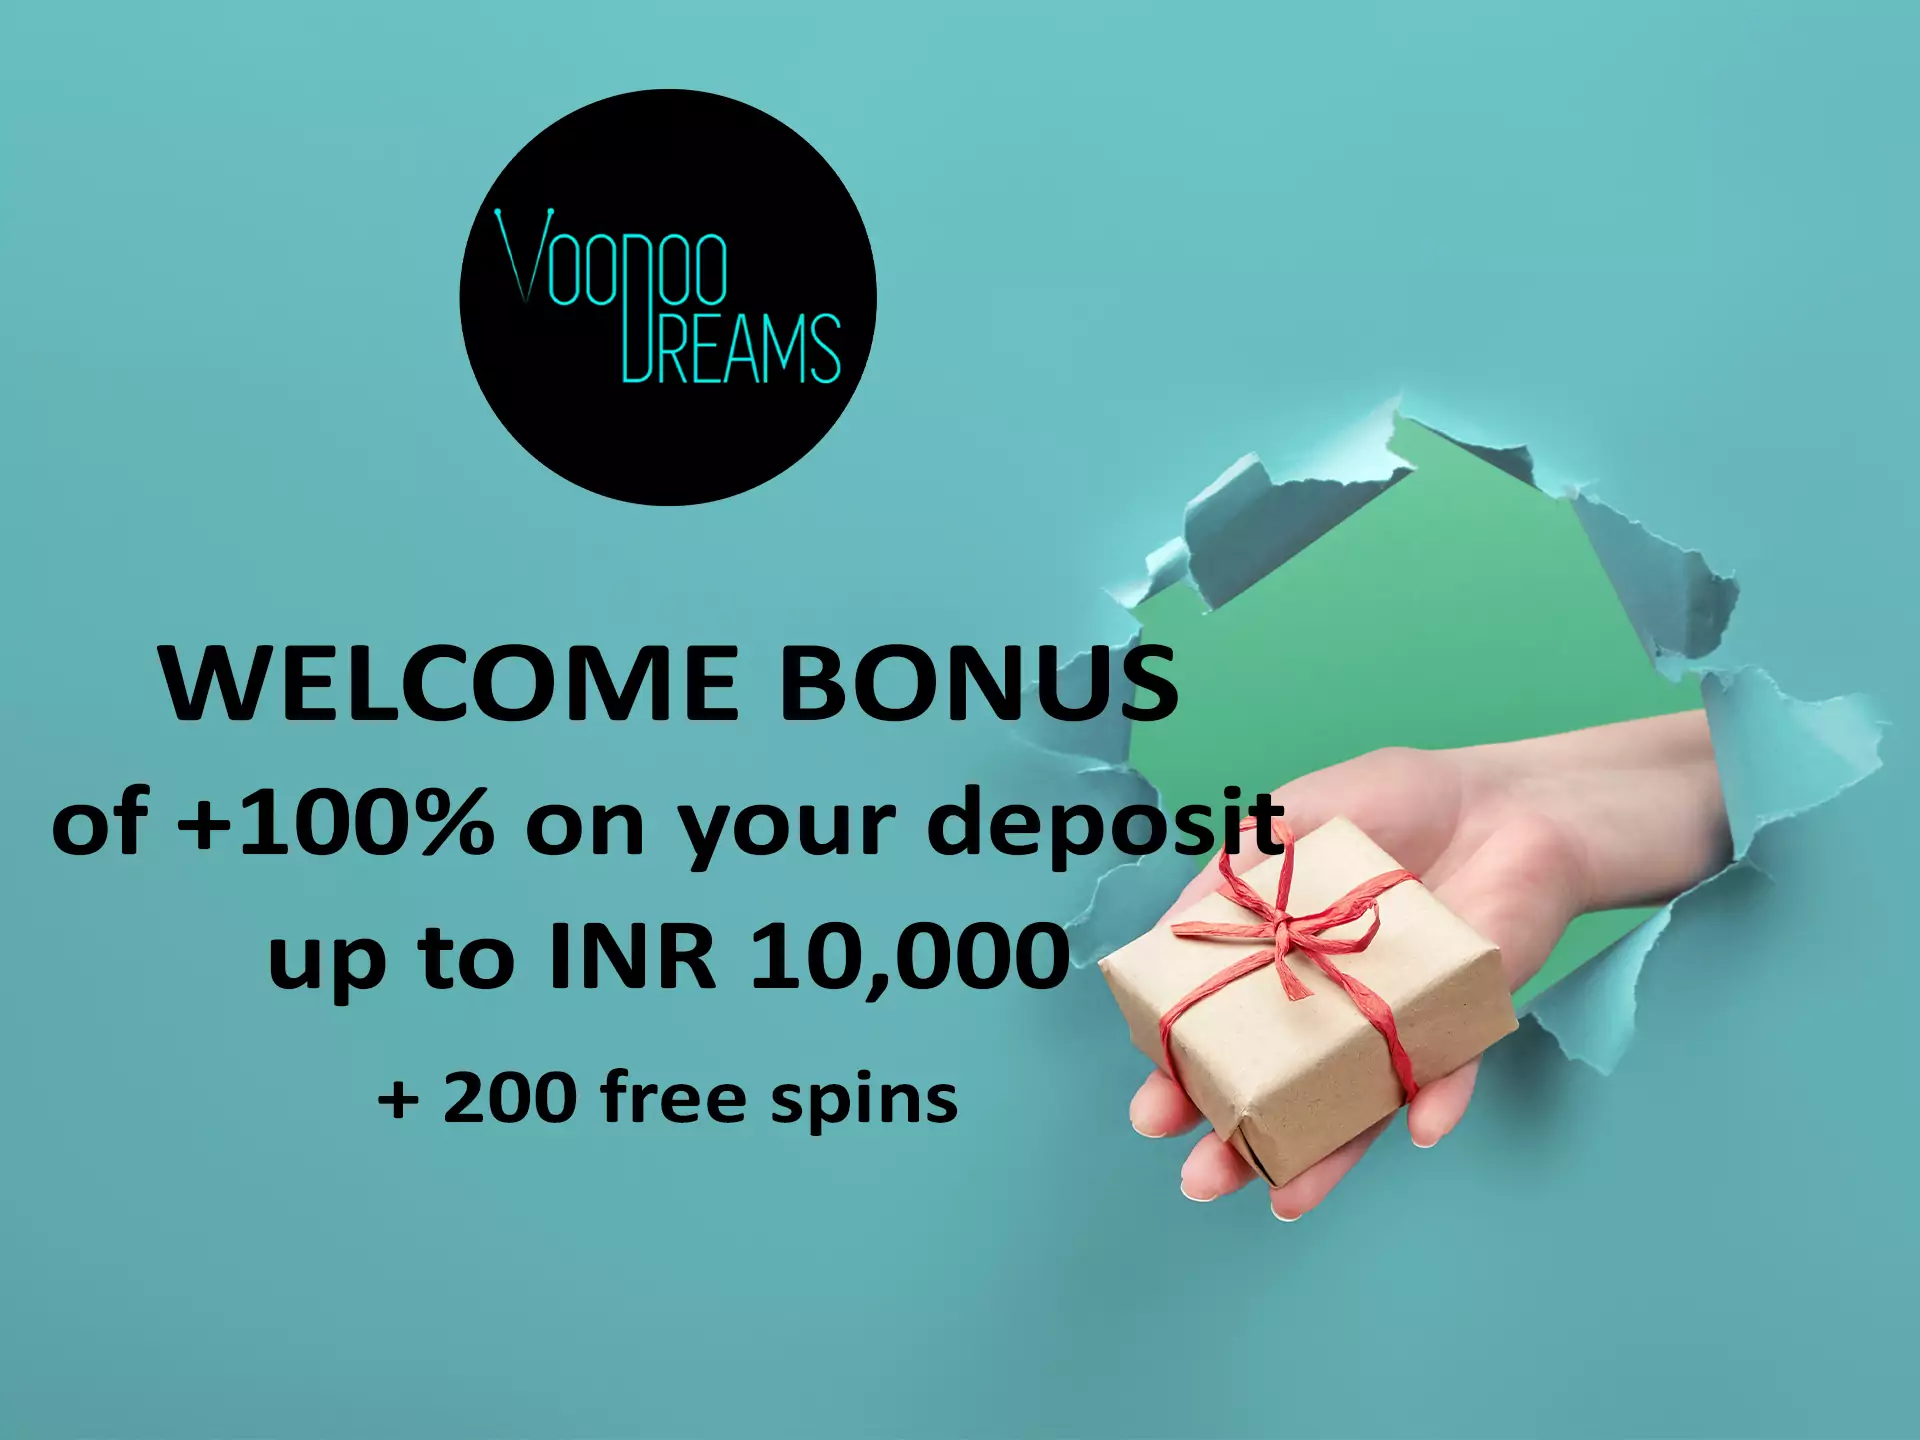 Make you first deposit on Woodoodreams and get a lucrative welcome bonus of up to 10.000 INR.